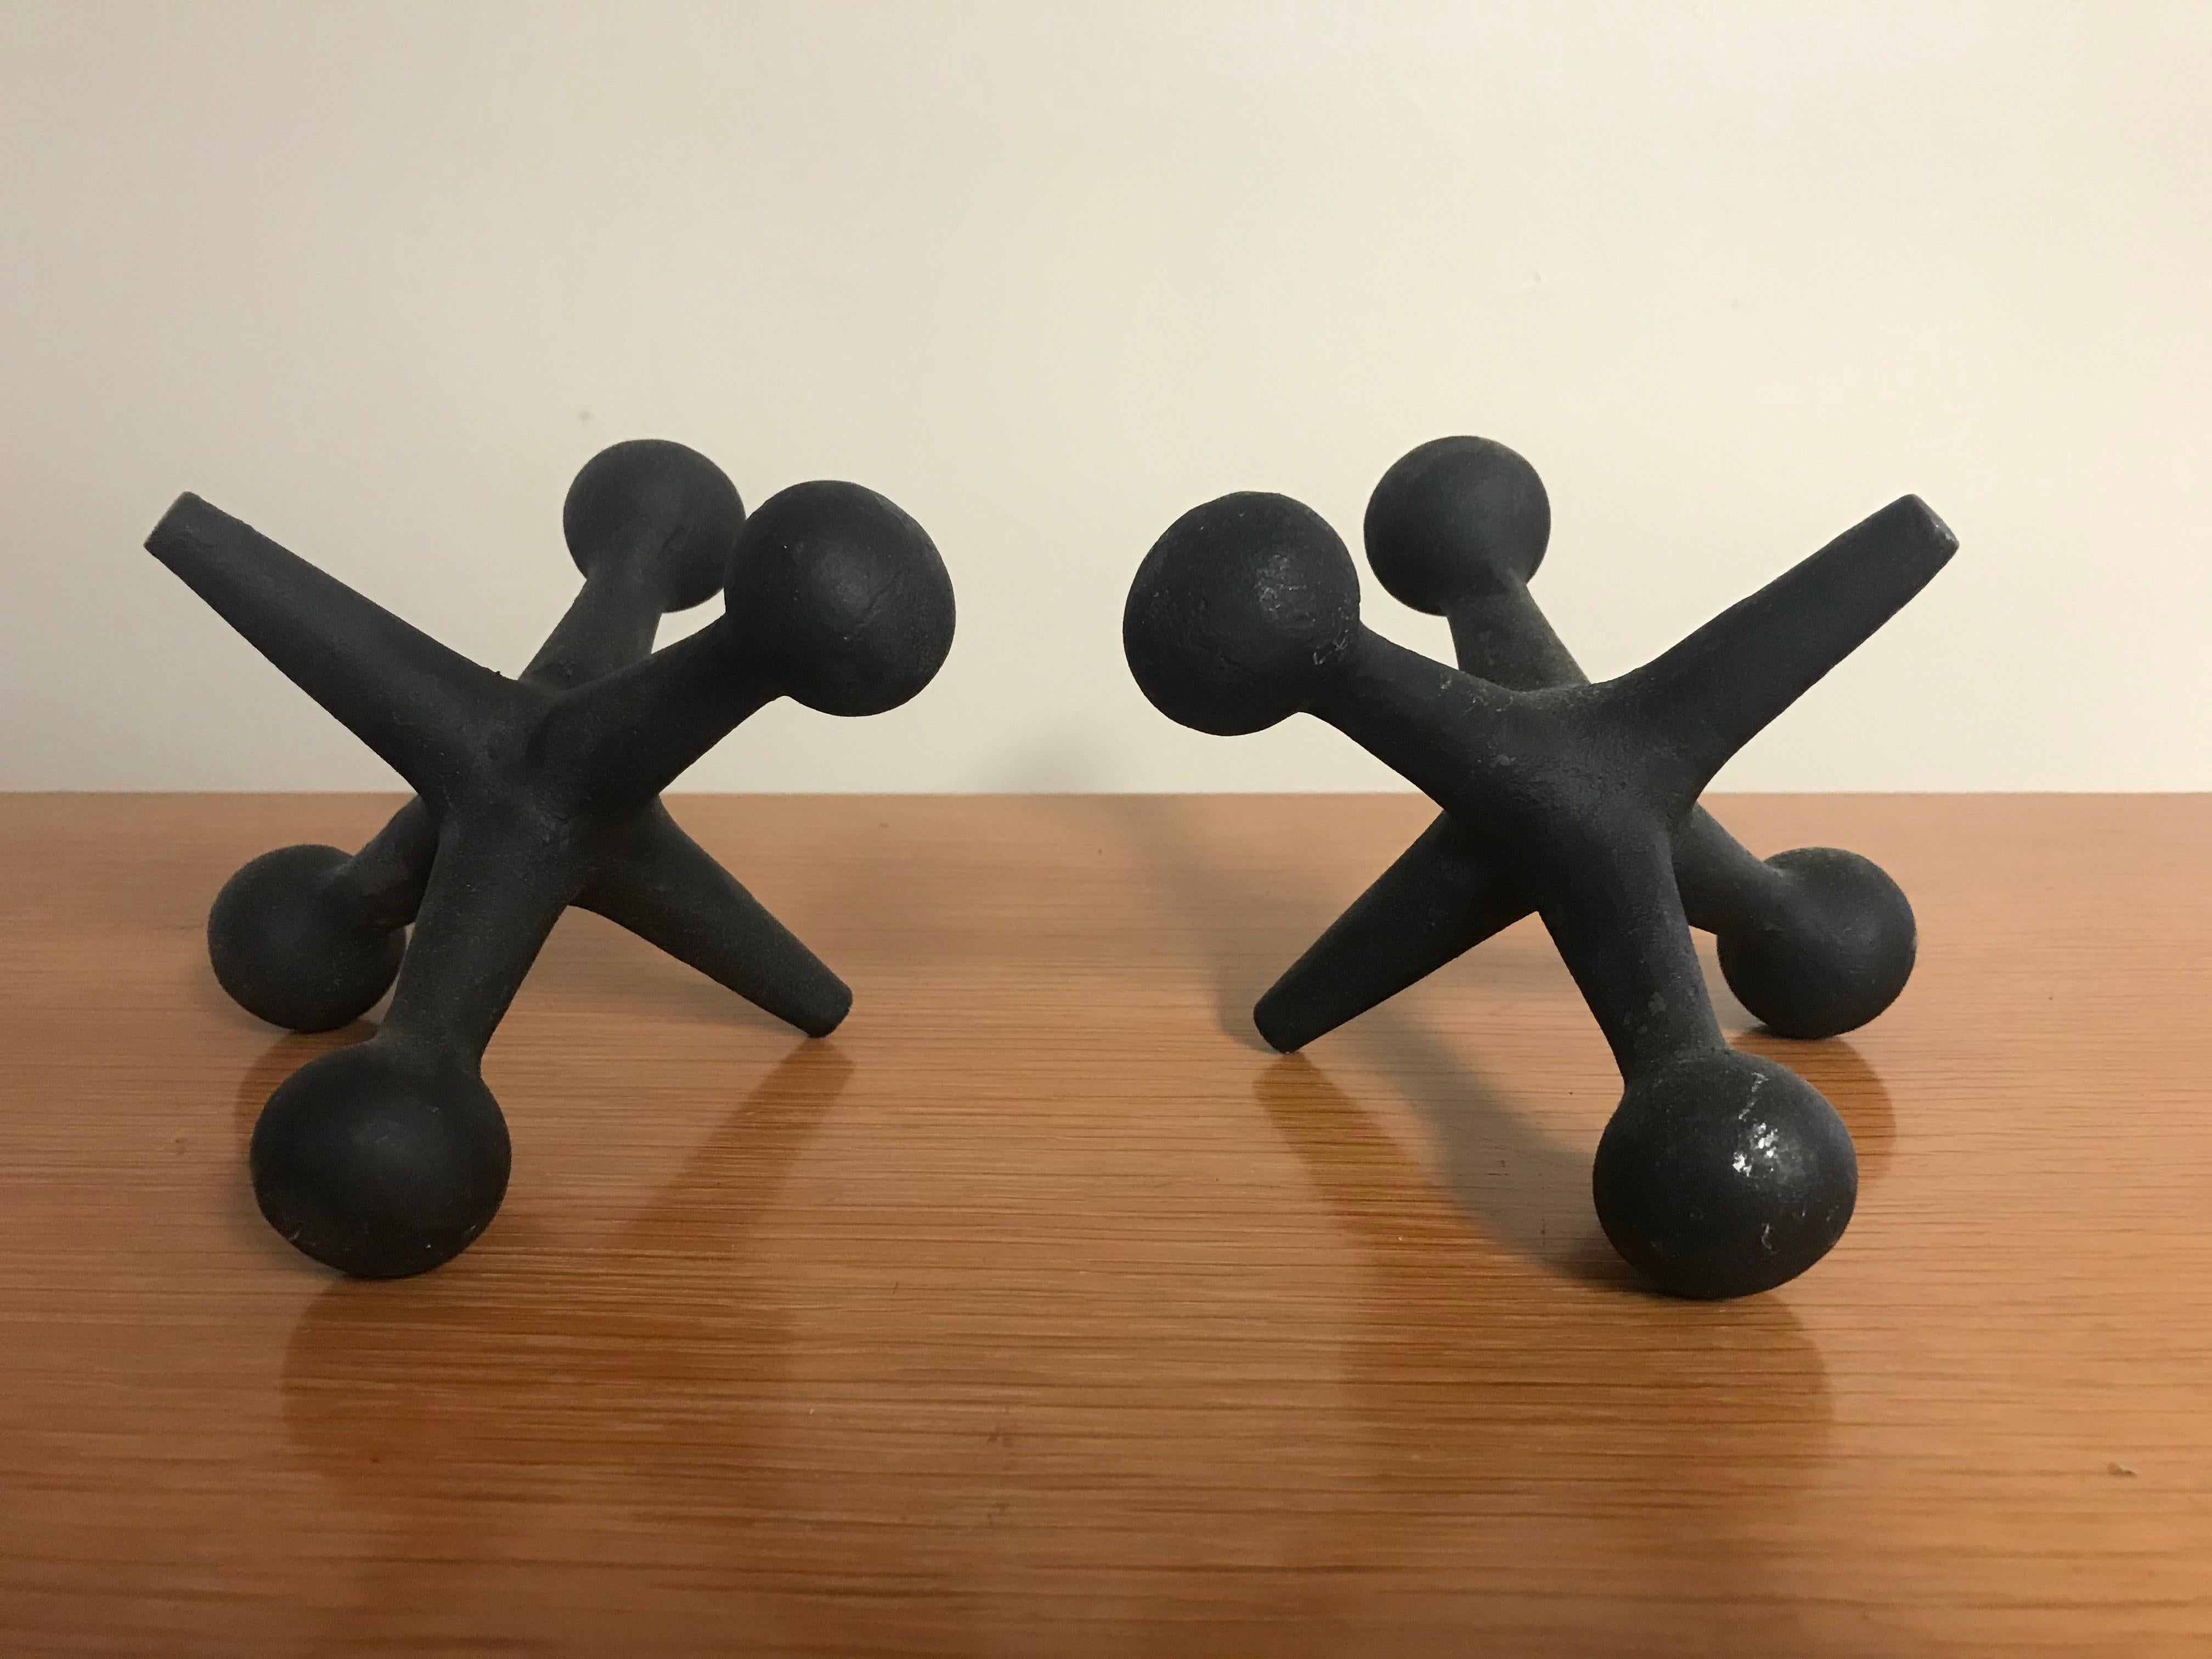 Mid-Century Modern Pair of Black Iron Pop Art 1960s Jacks Bookends by Bill Curry for Design Line